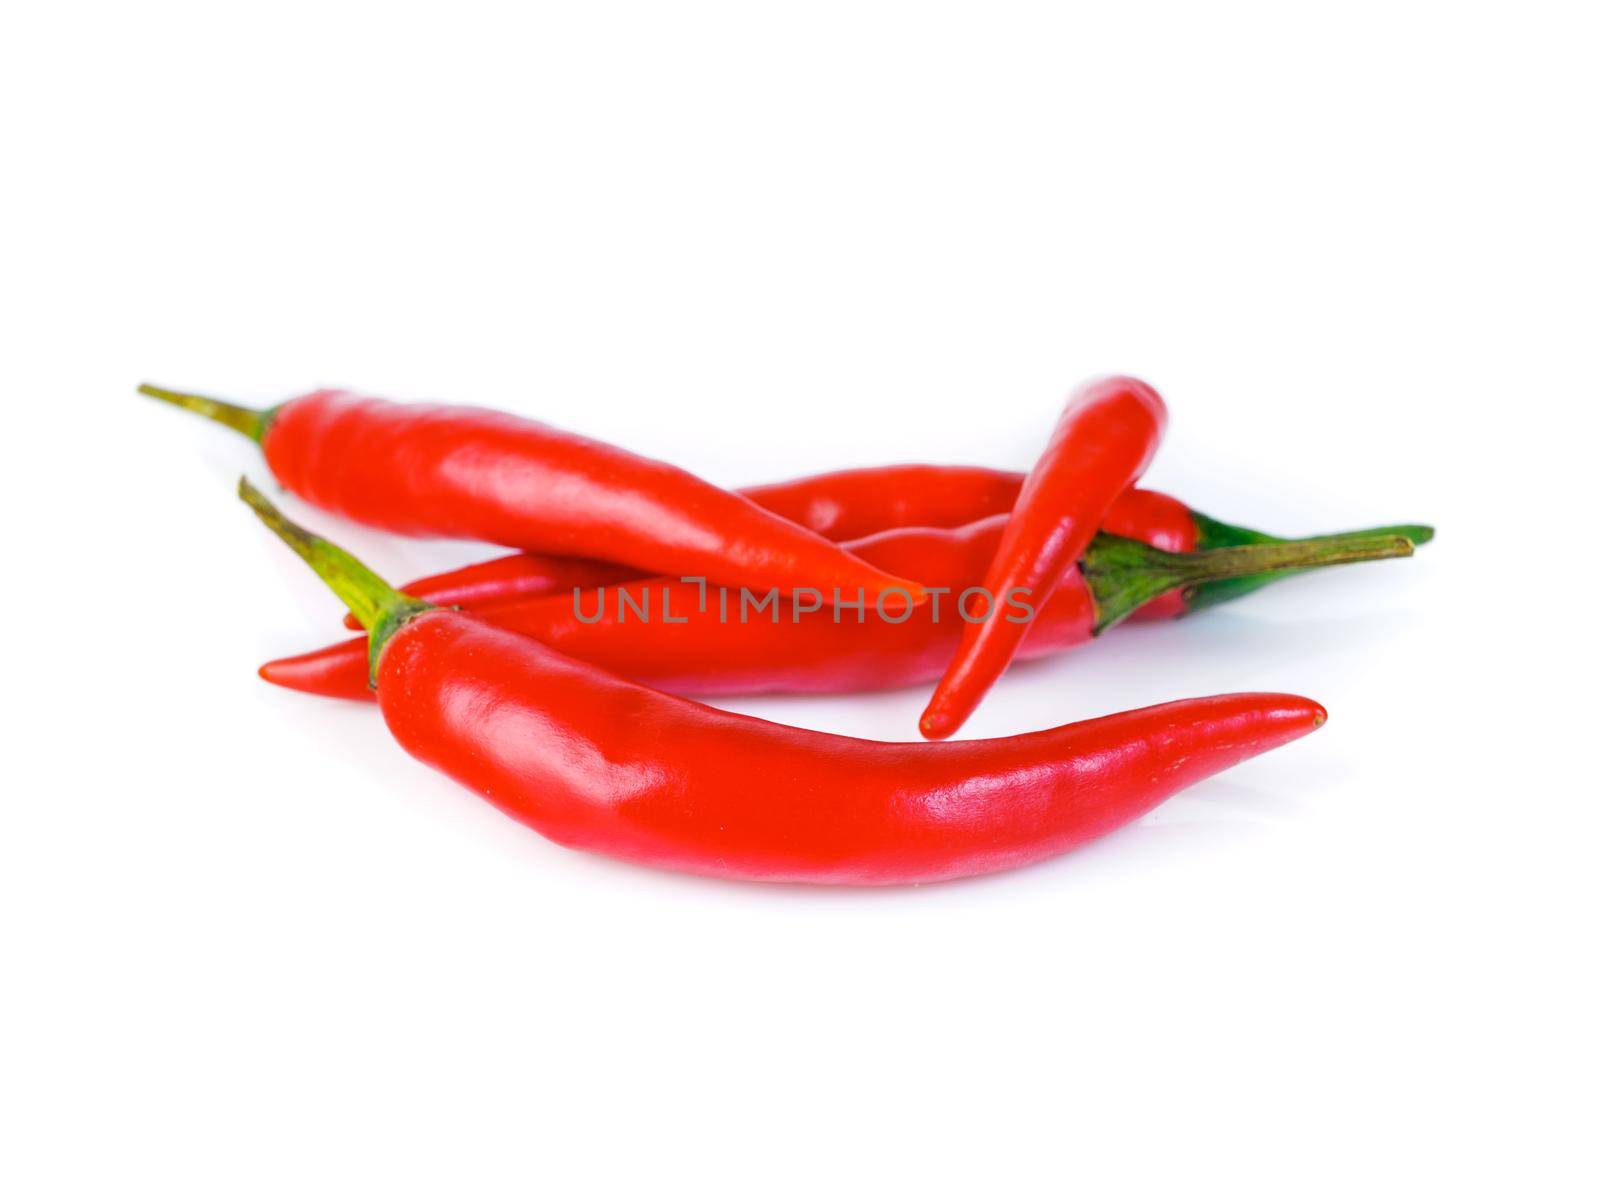 Red hot chili pepper on white background, side view by NataBene